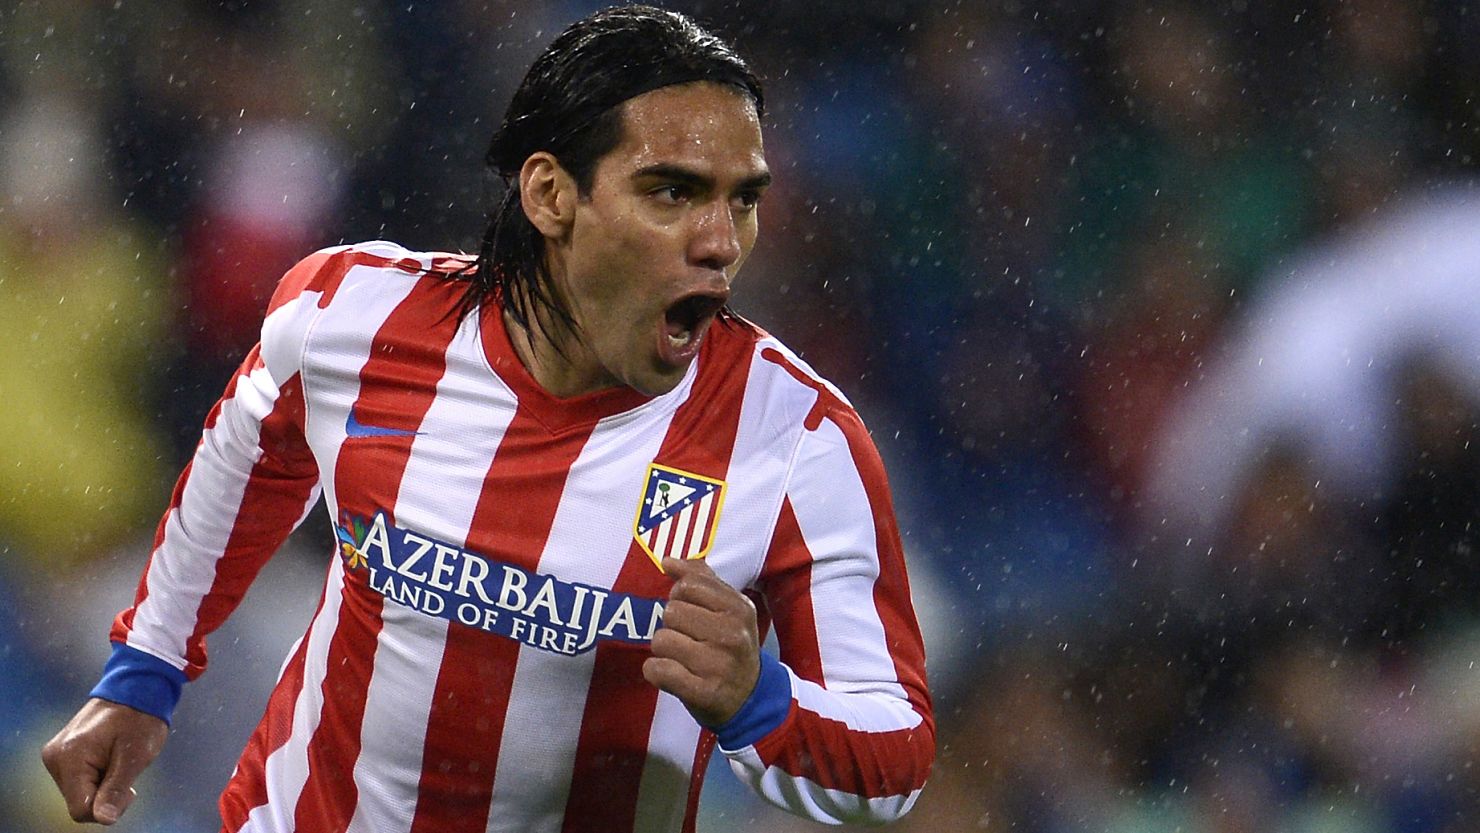 Colombian striker Radamel Falcao fired Atletico Madrid to Spanish Cup triumph earlier this month.